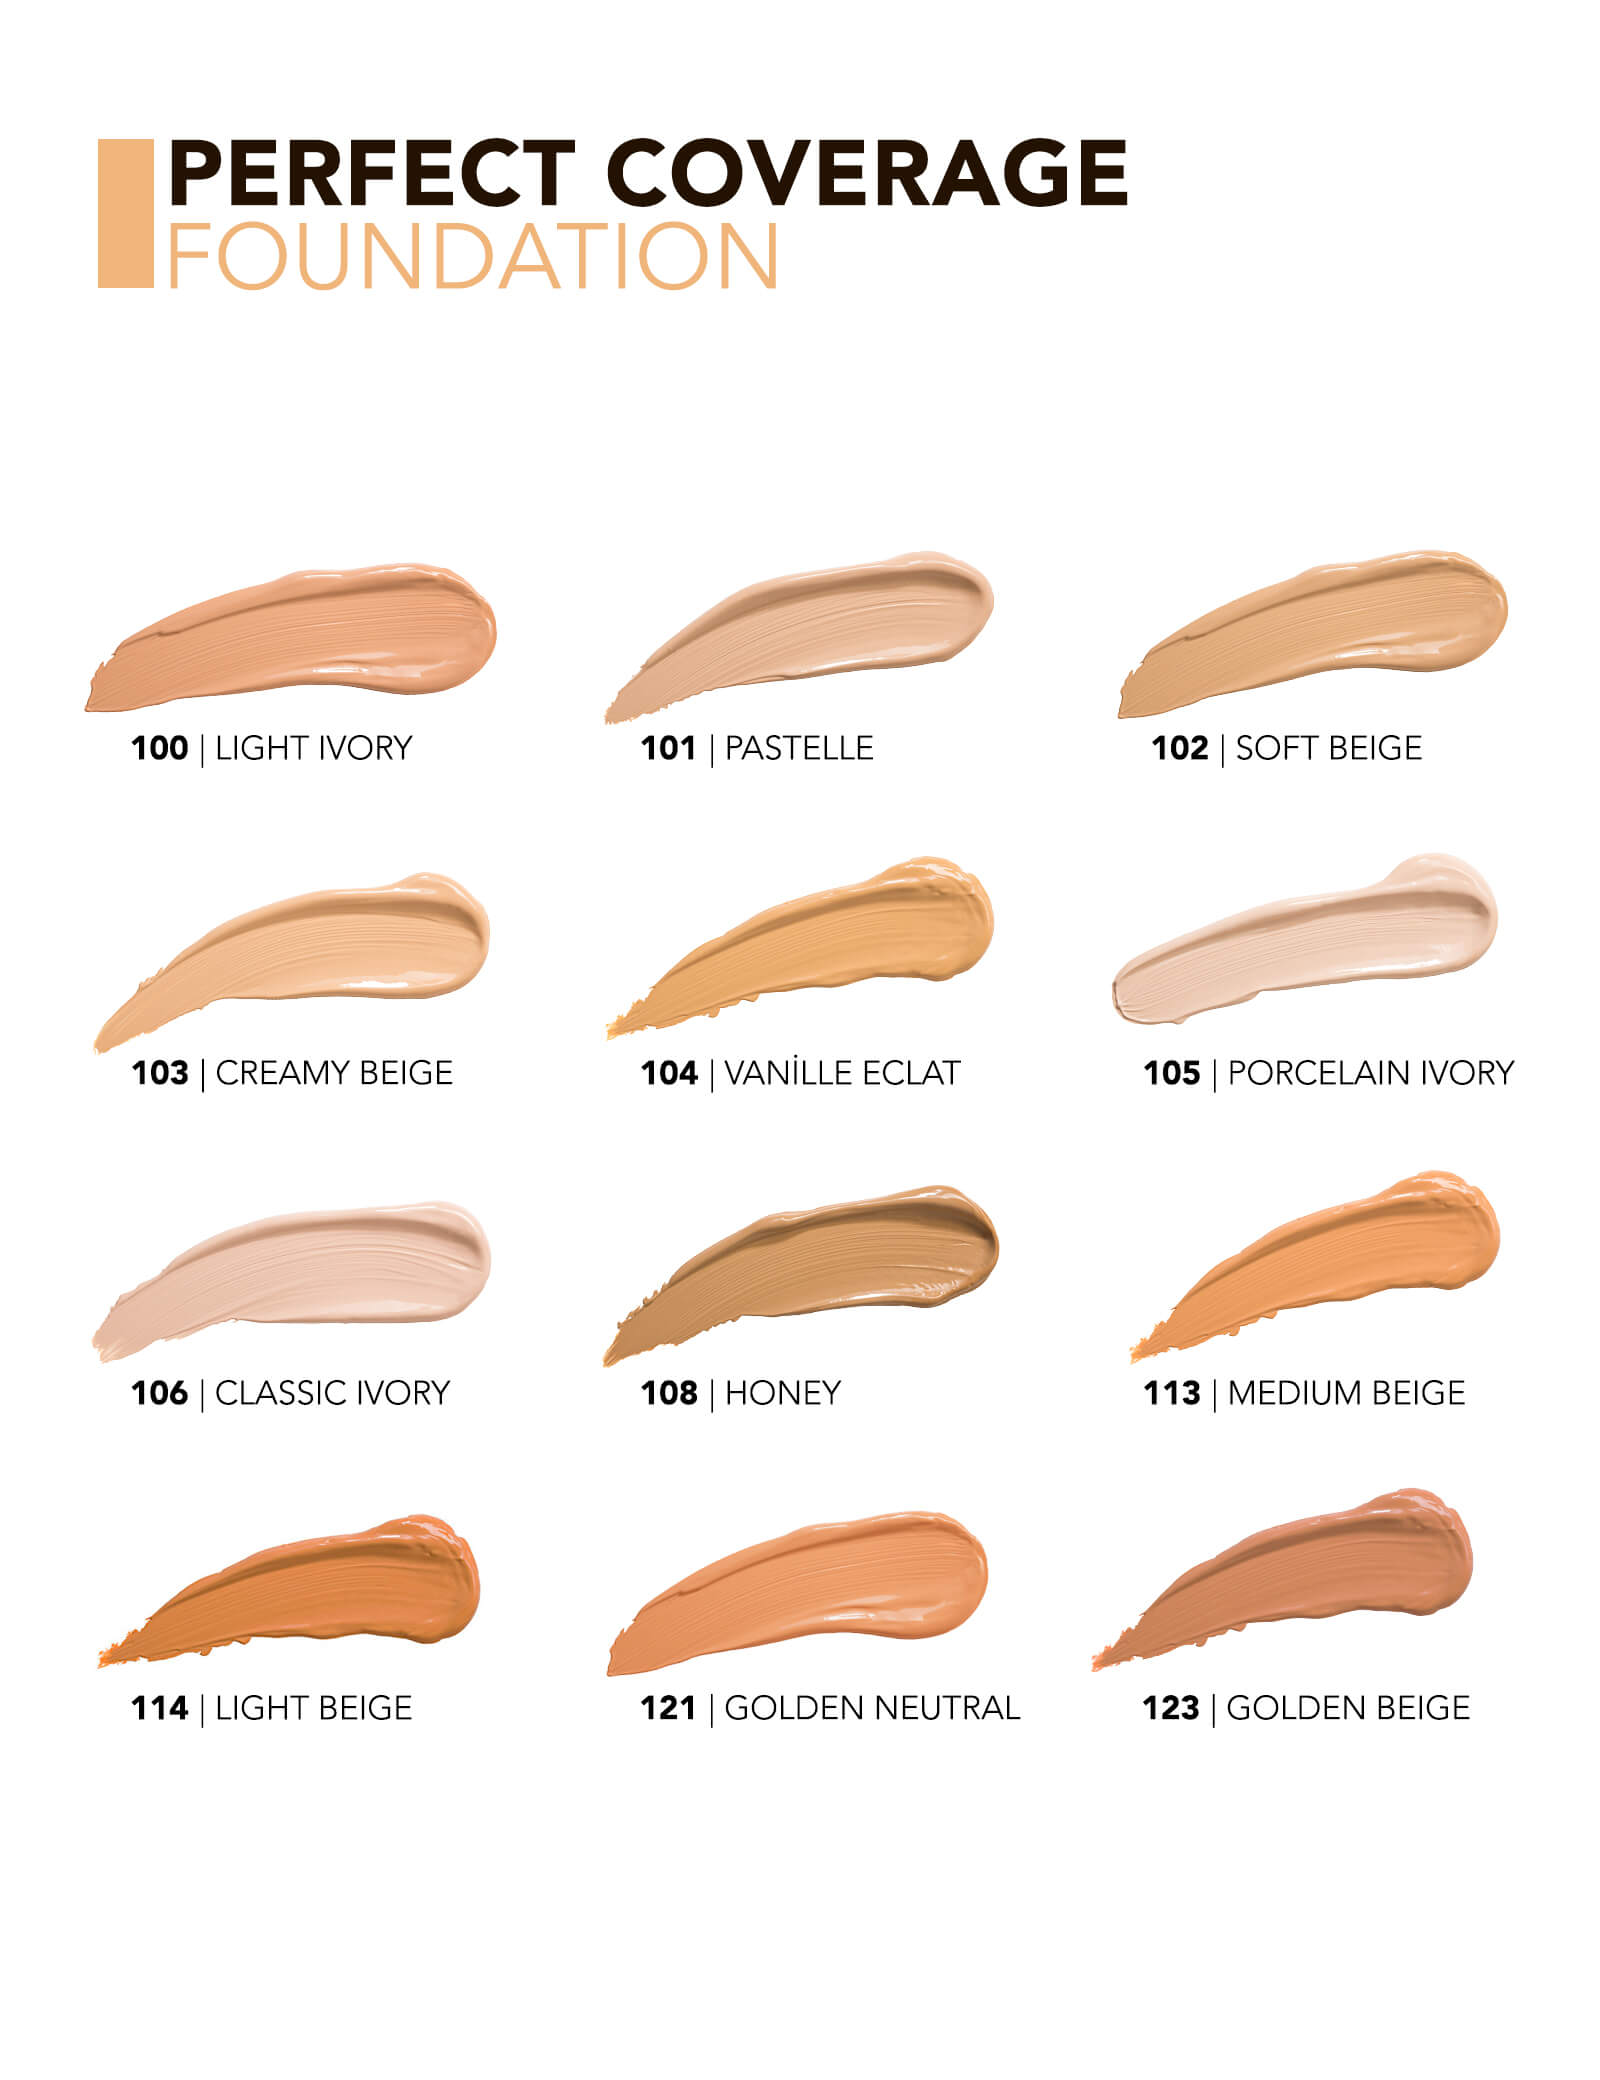 Flormar Perfect Coverage Foundation - 106 Classic Ivory - Miazone